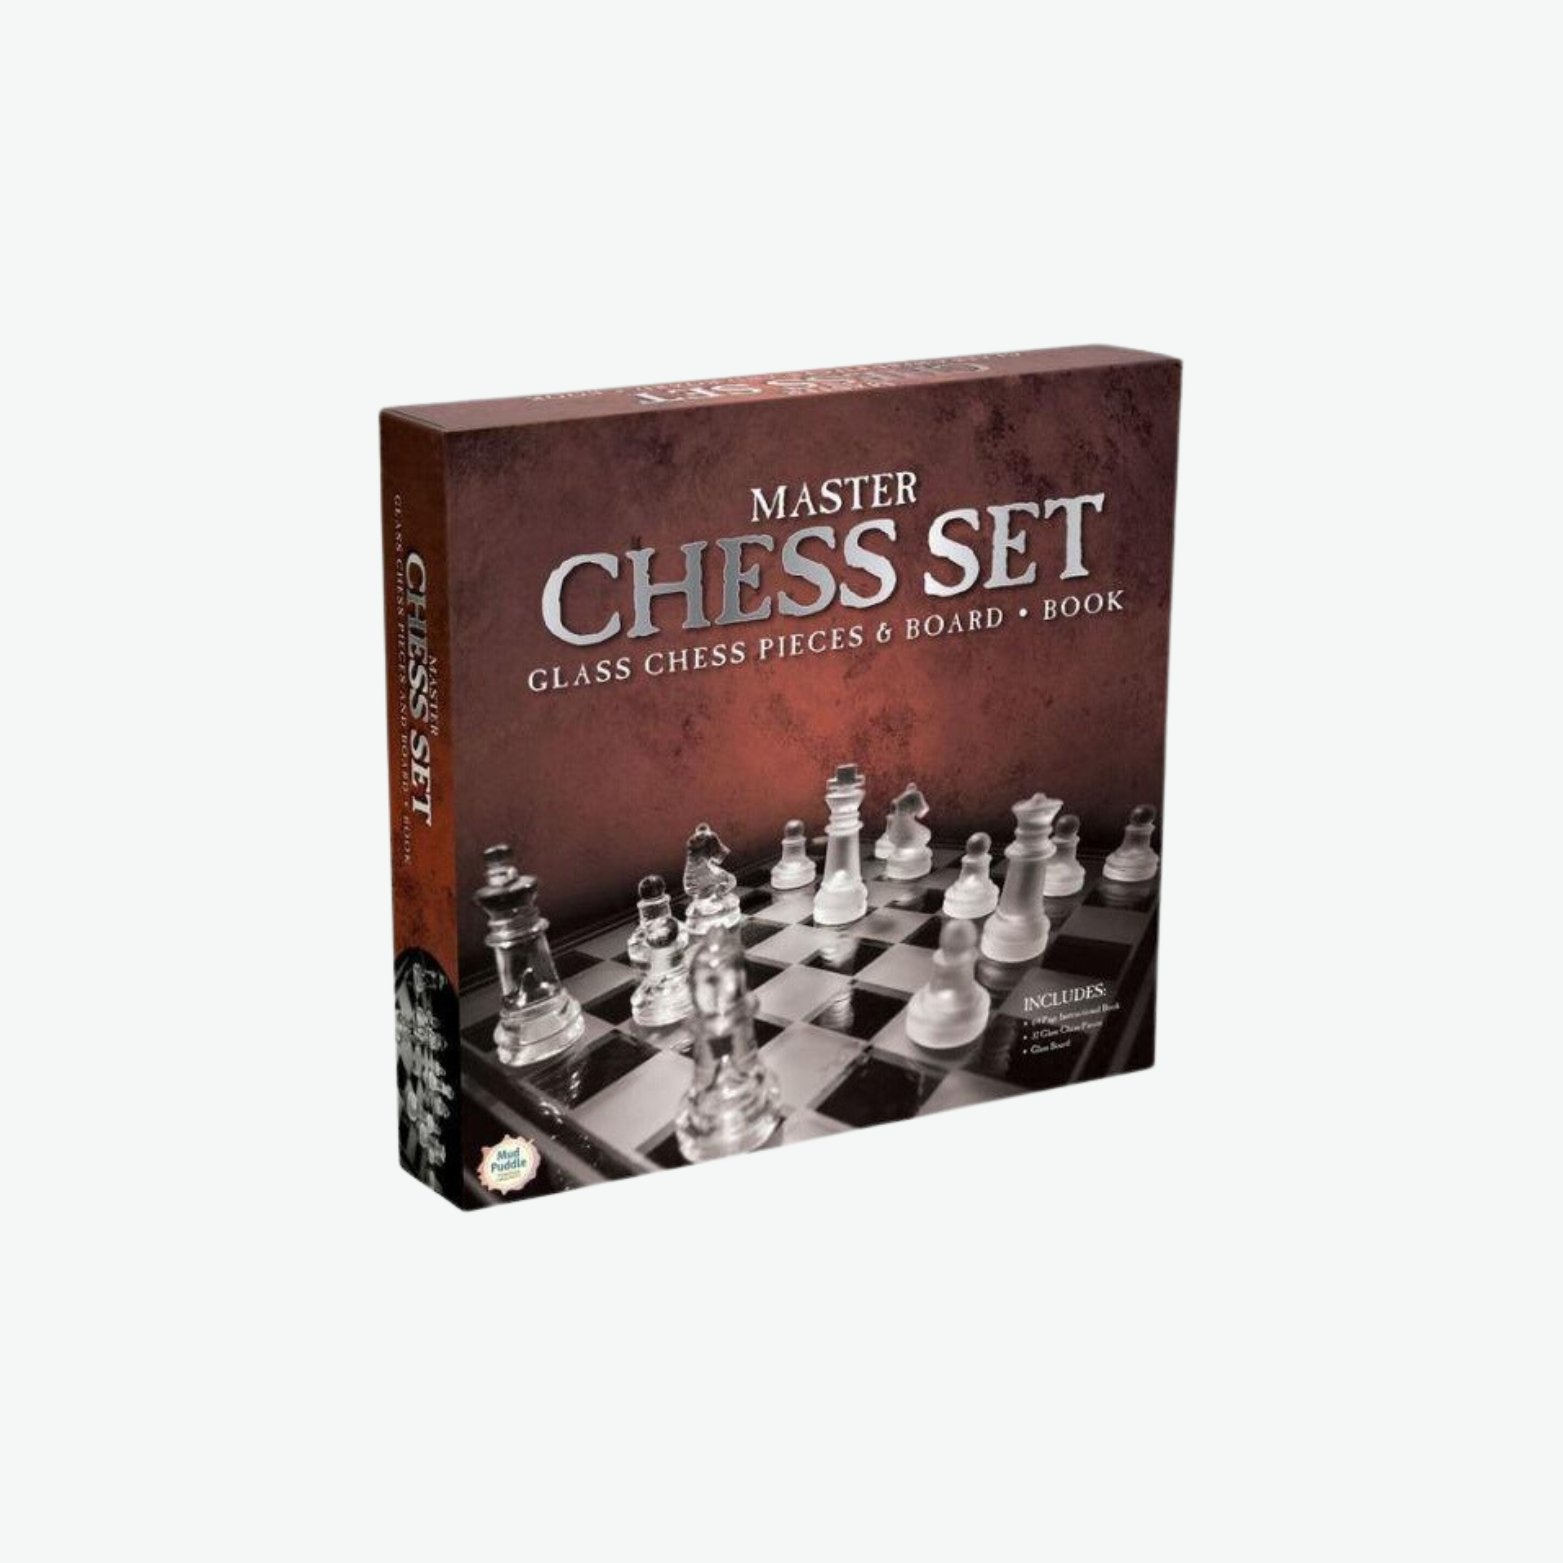 Glass Chess Board and Pieces.jpg